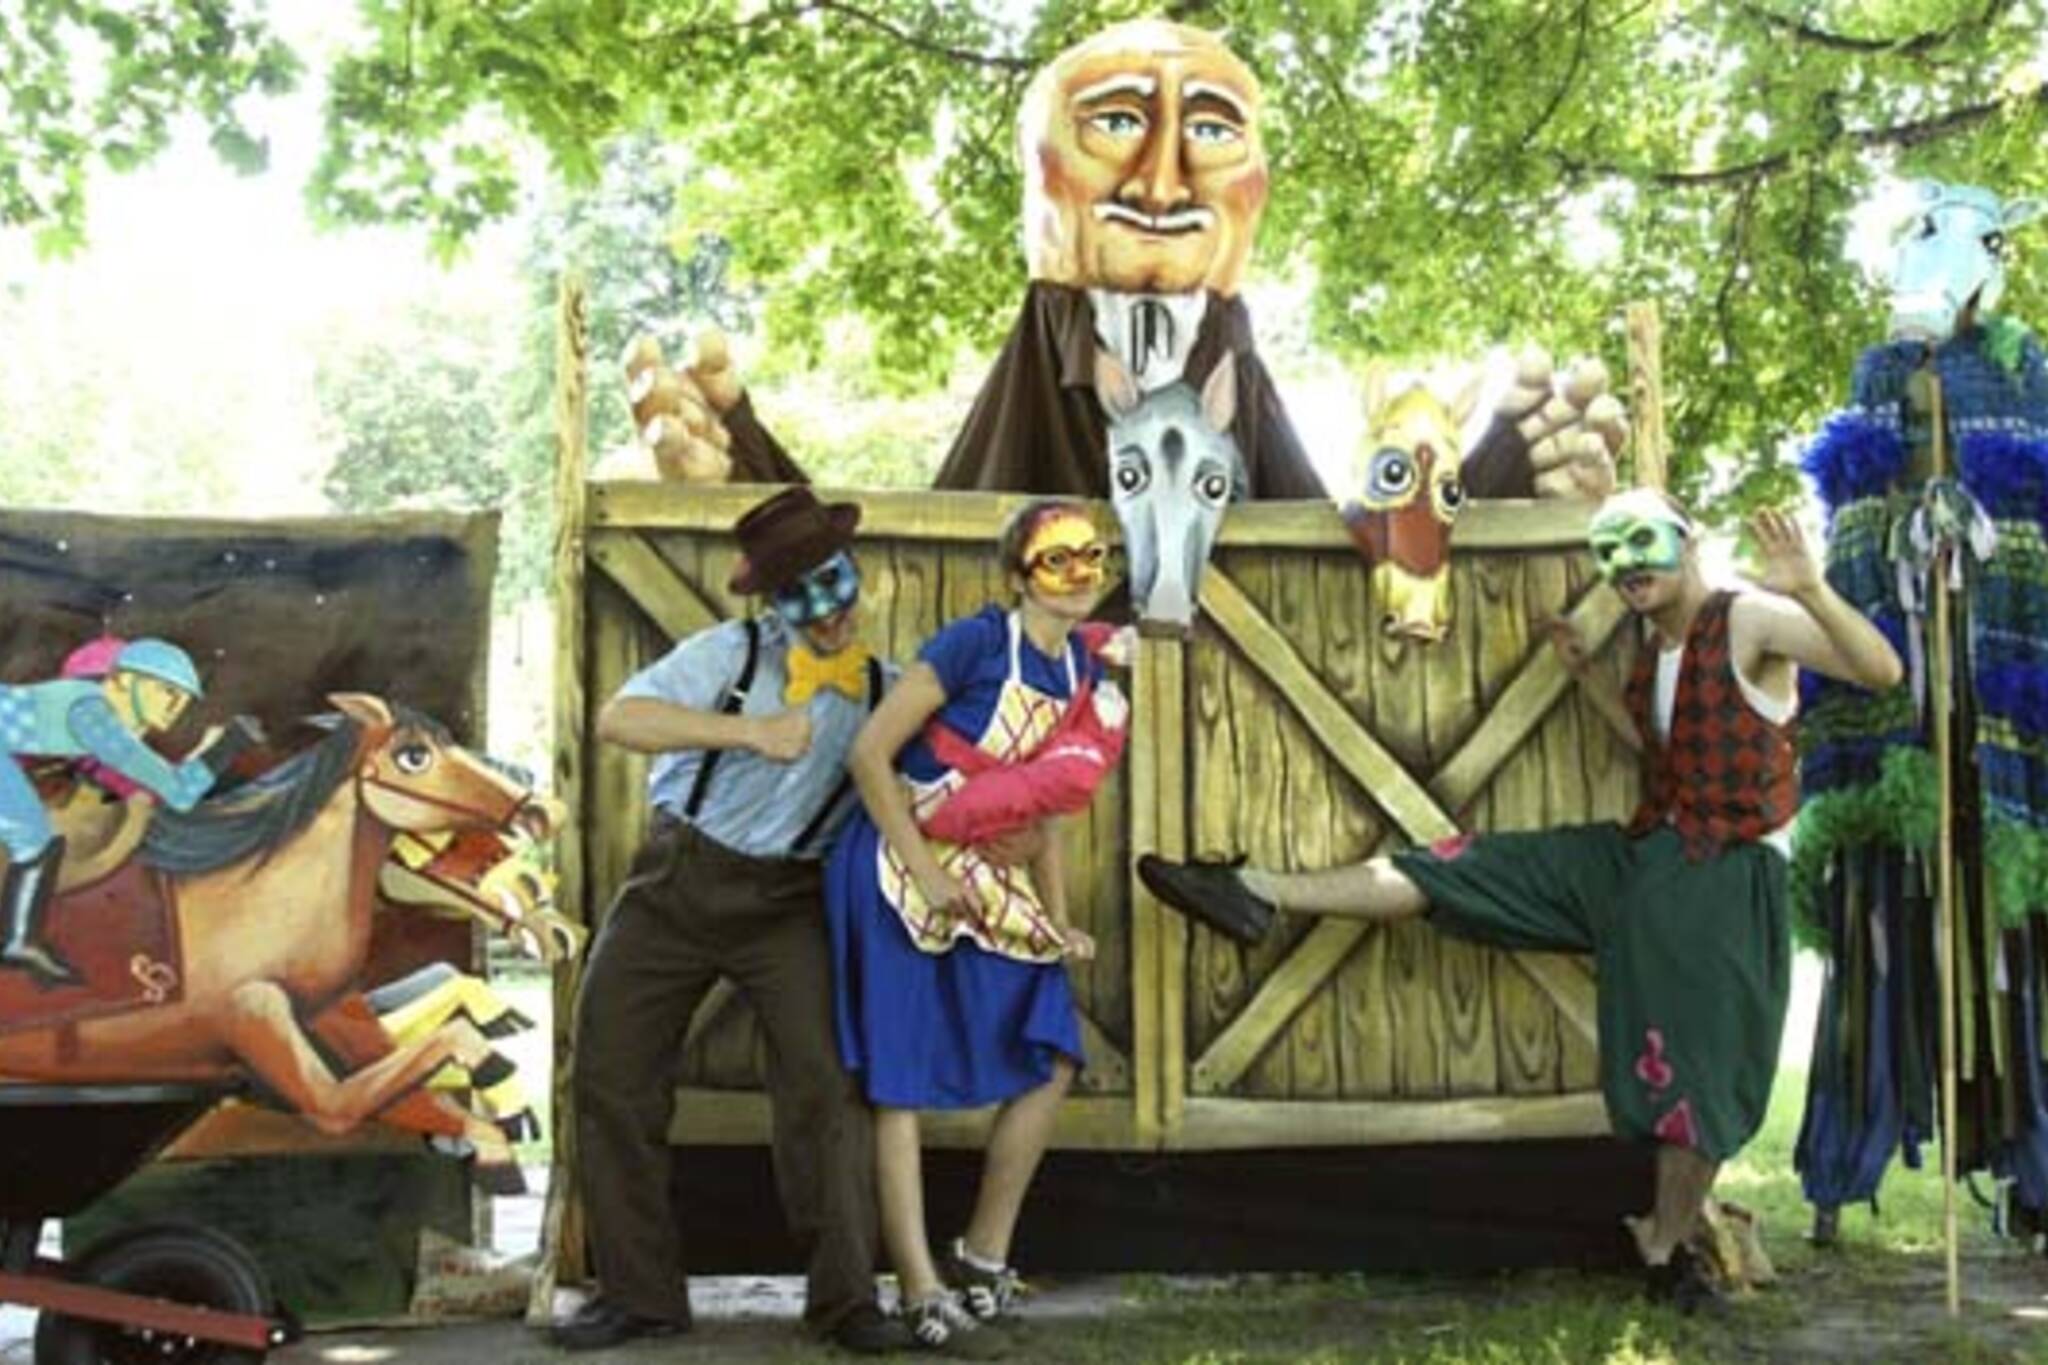 Horse Feathers performed by Clay & Paper Theatre in Dufferin Grove Park in Toronto